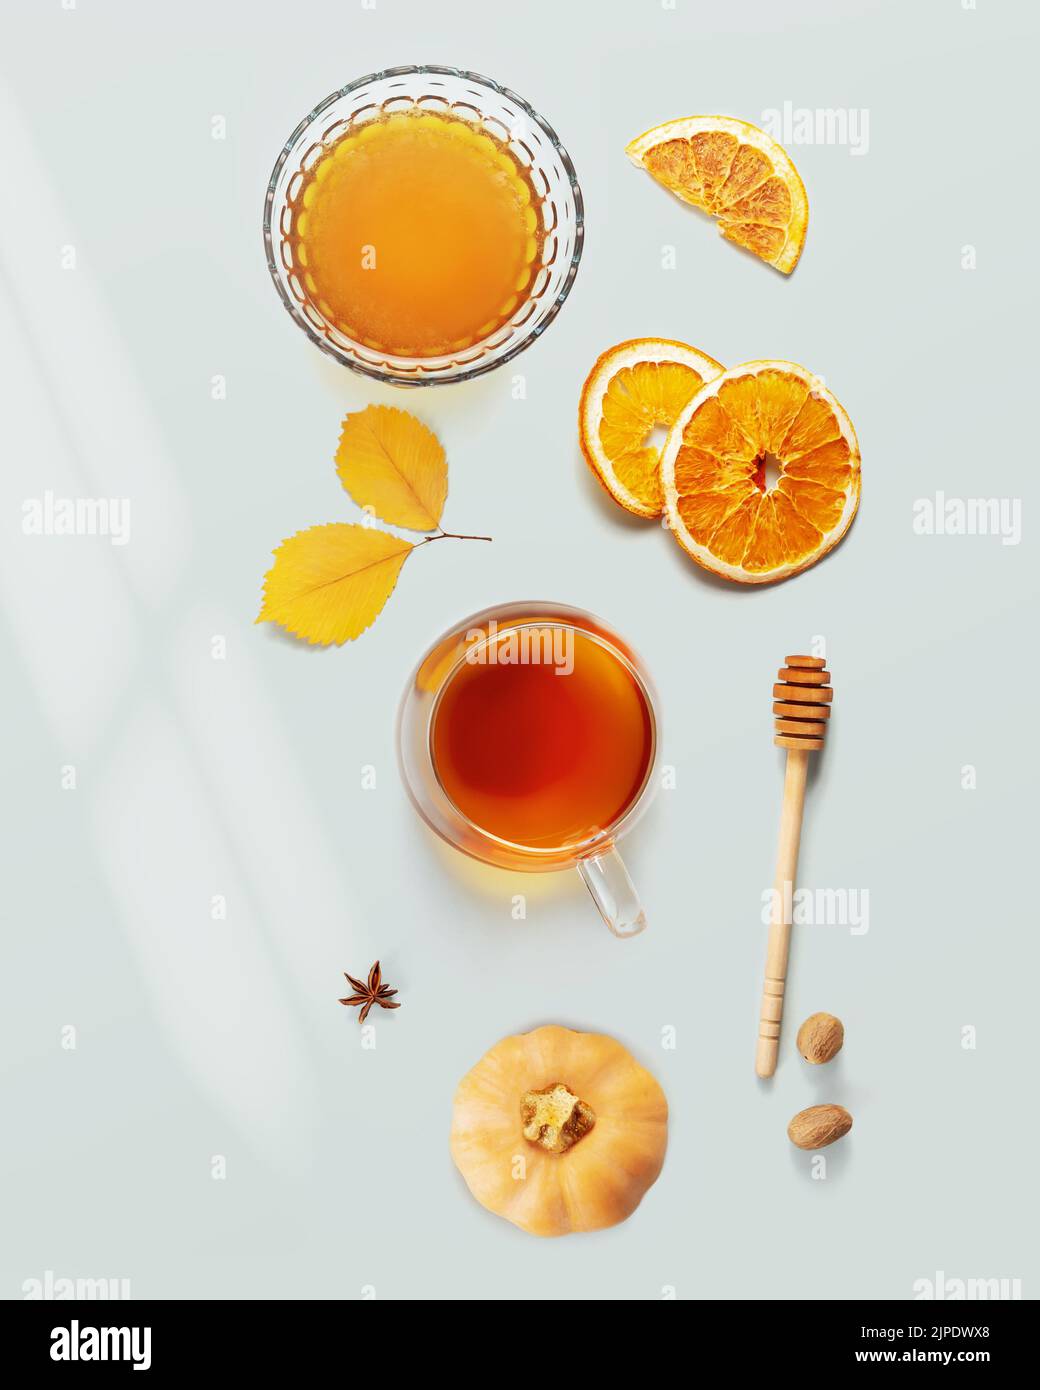 Autumn food. Herbal tea, honey, dry oranges and spices on a blue background with autumn leaves. Immune boosting food, cozy meal. Flat lay Stock Photo